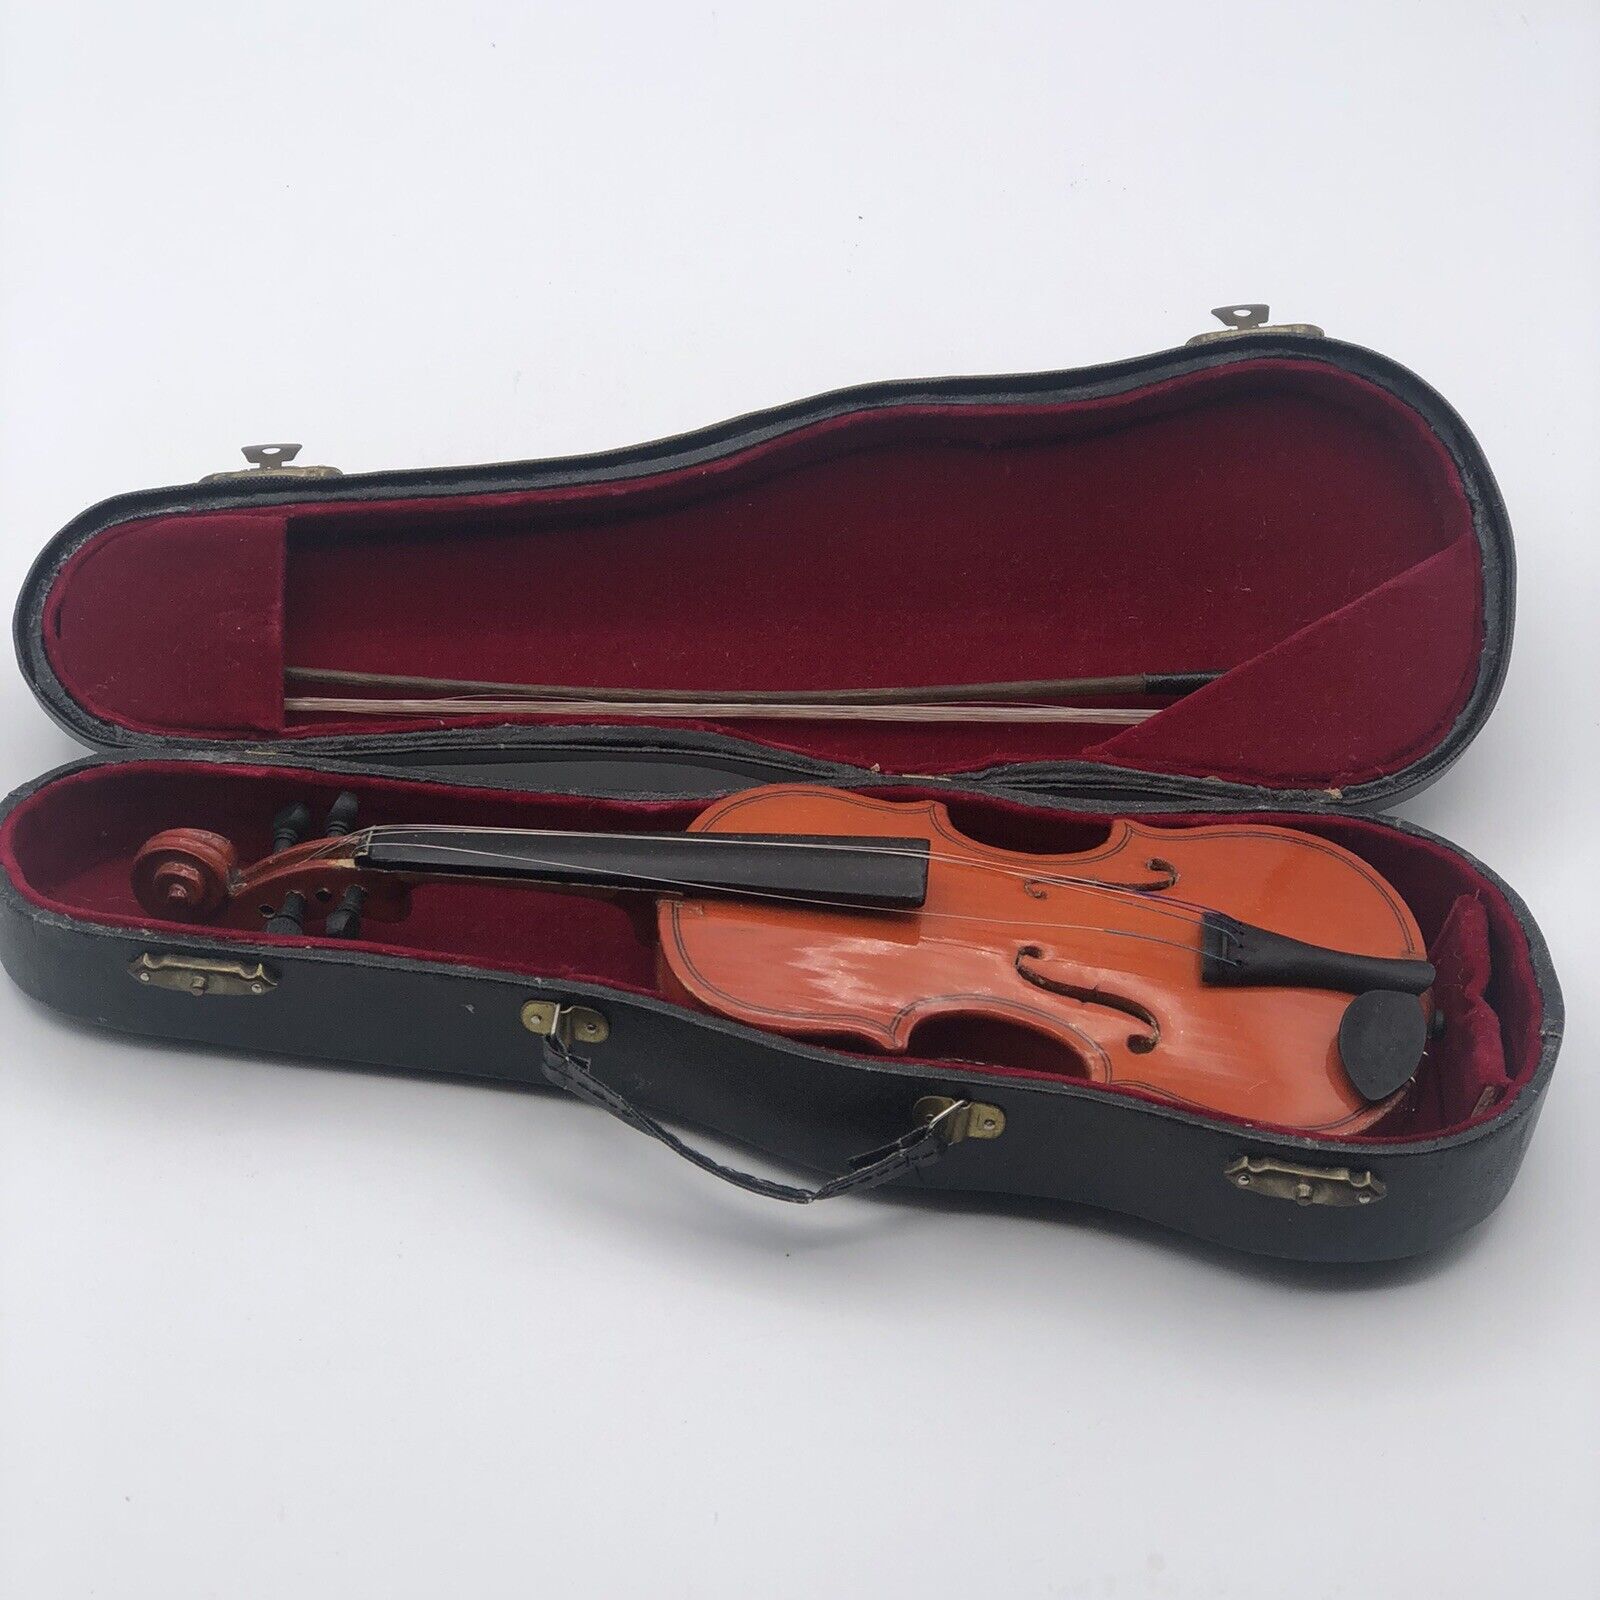 Miniature Violin With Bow And Case Decorative Display Piece